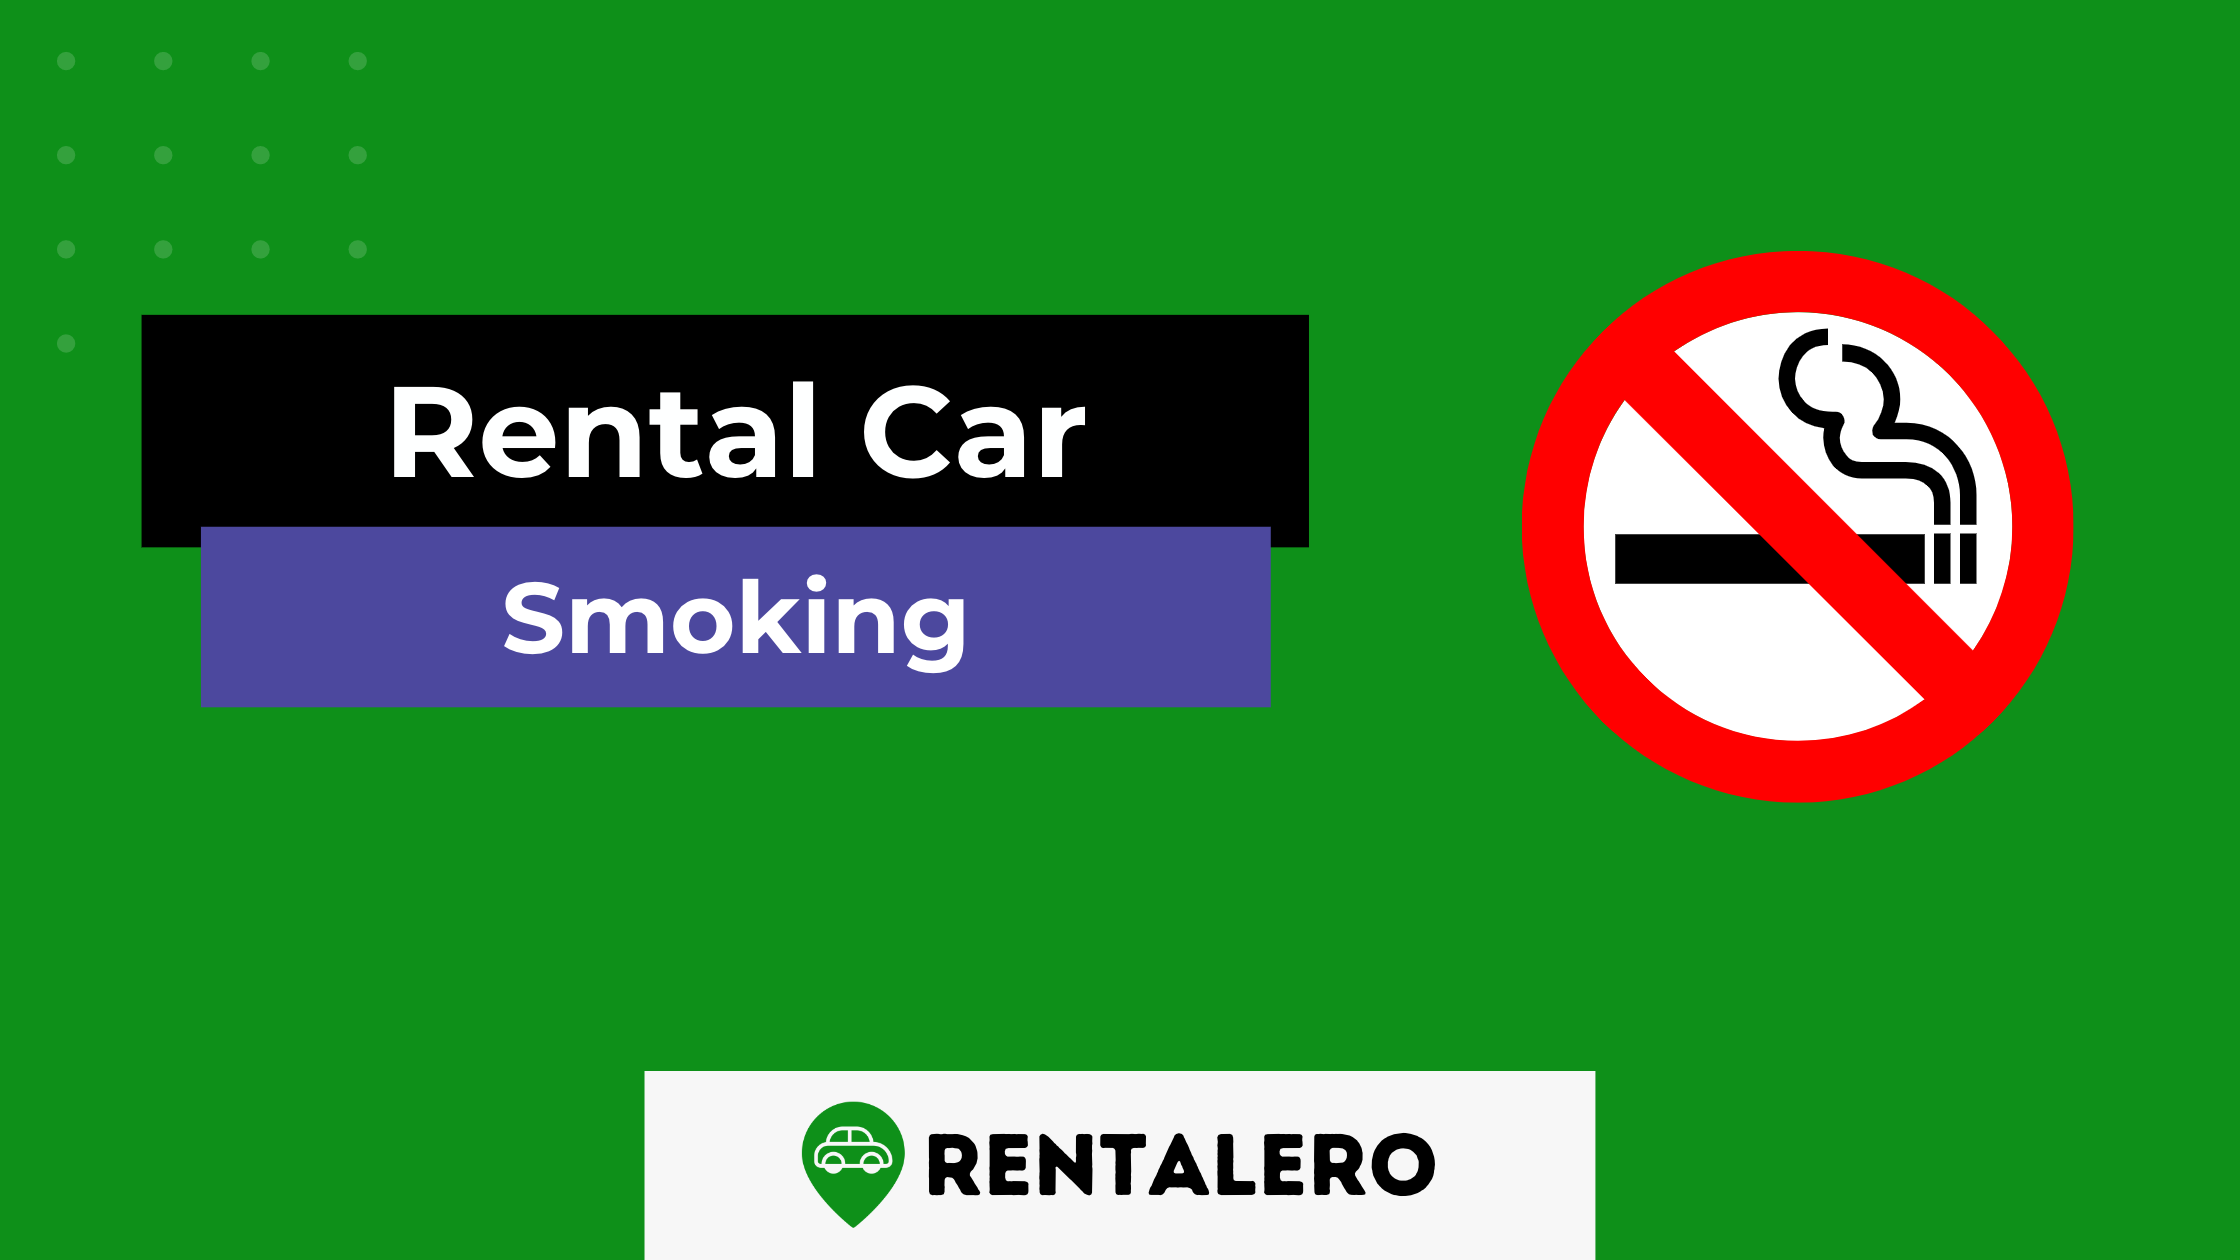 What Happens If You Smoke in a Rental Car?